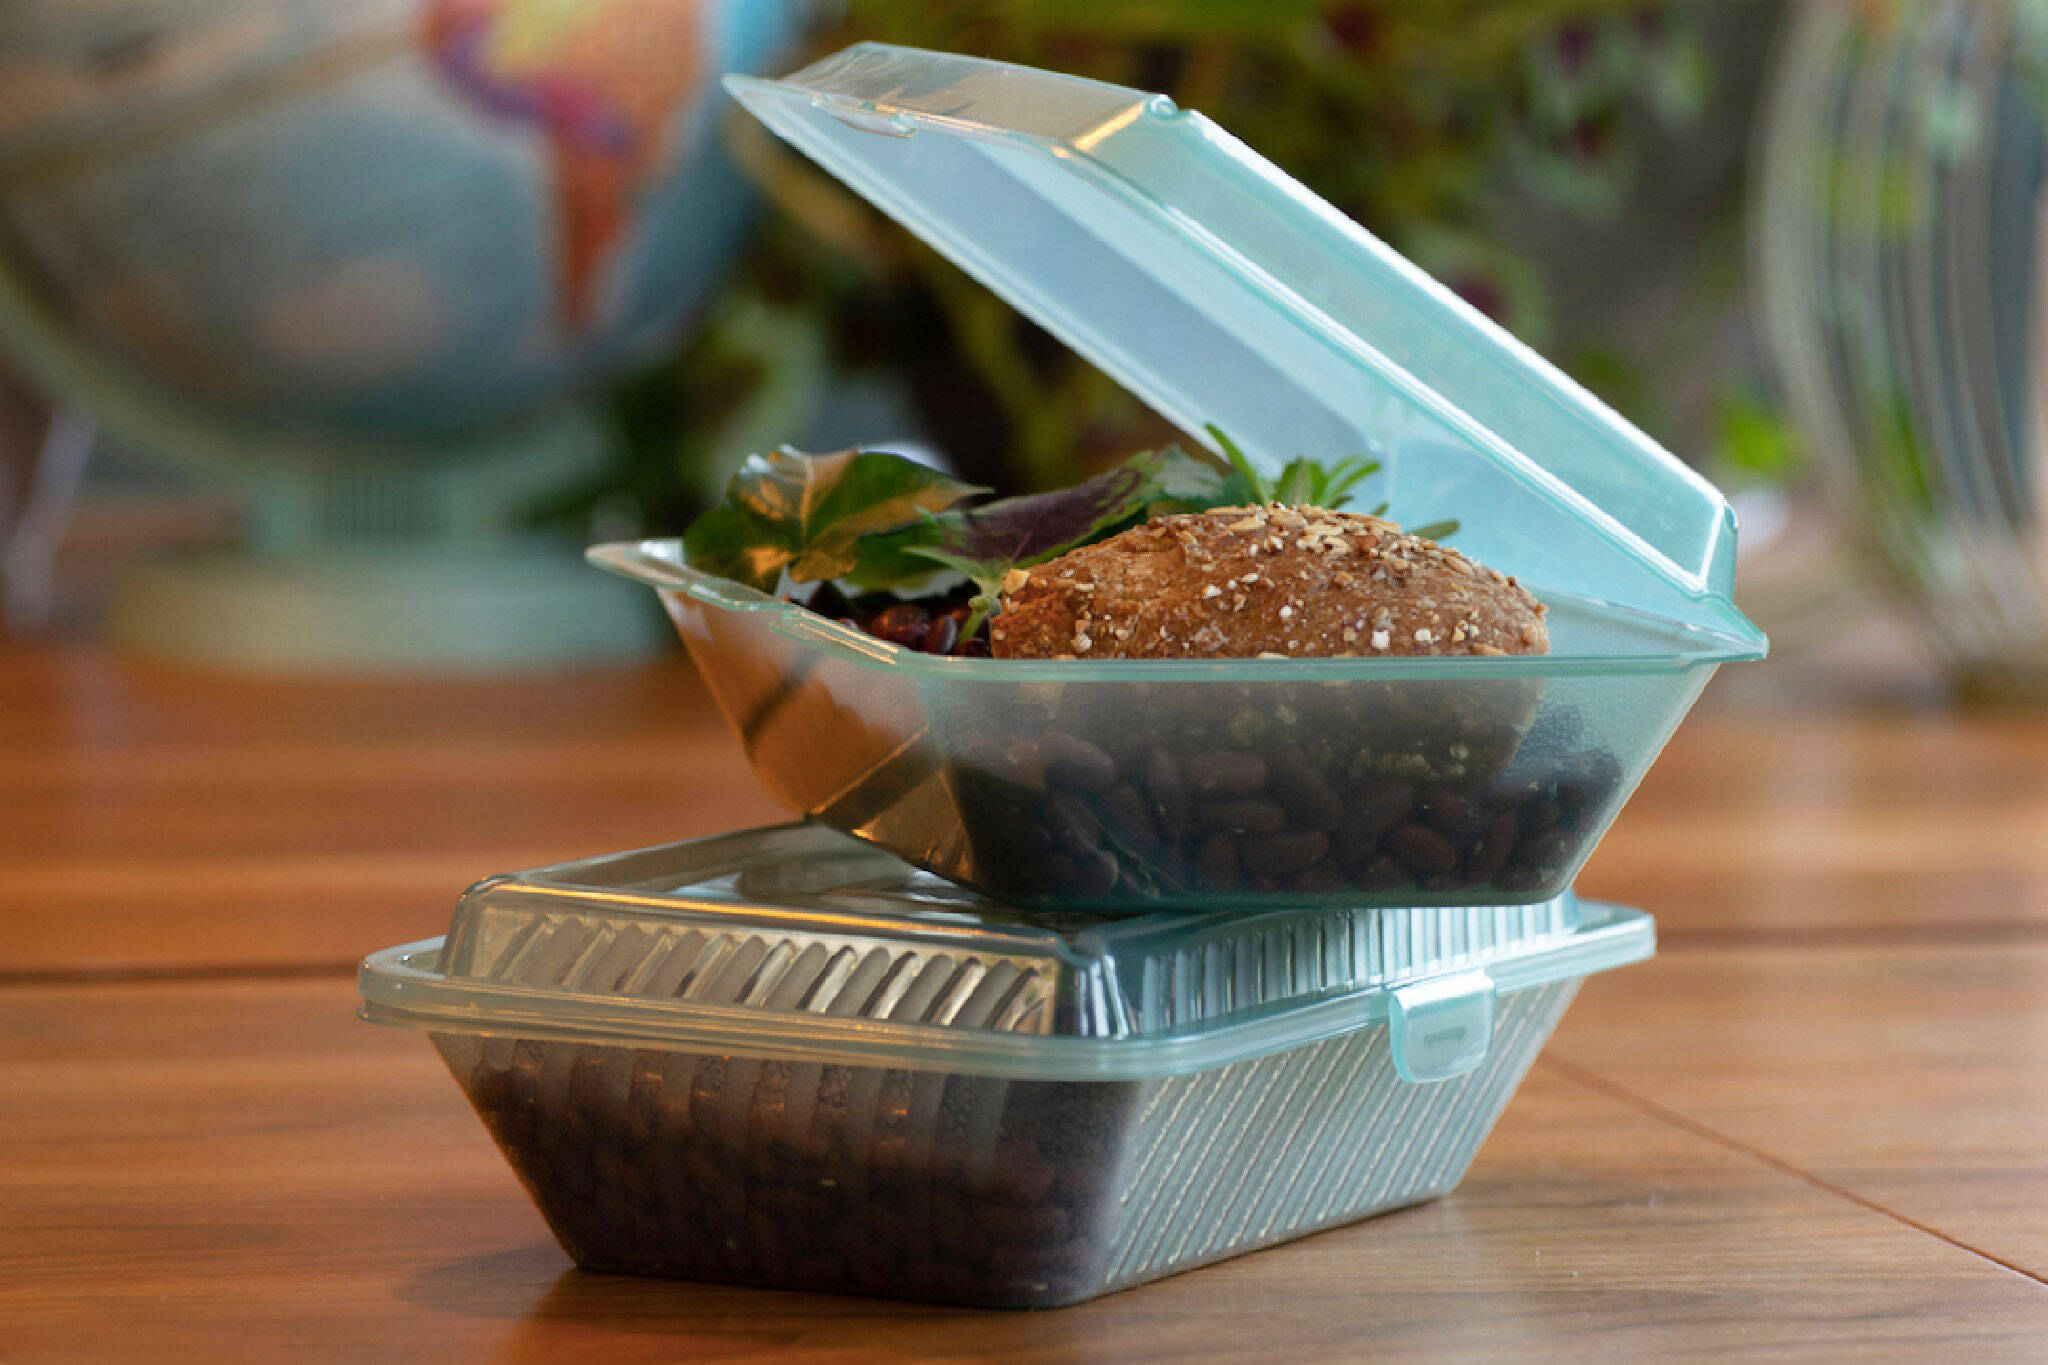 Toronto is getting its first city-wide reusable restaurant takeout